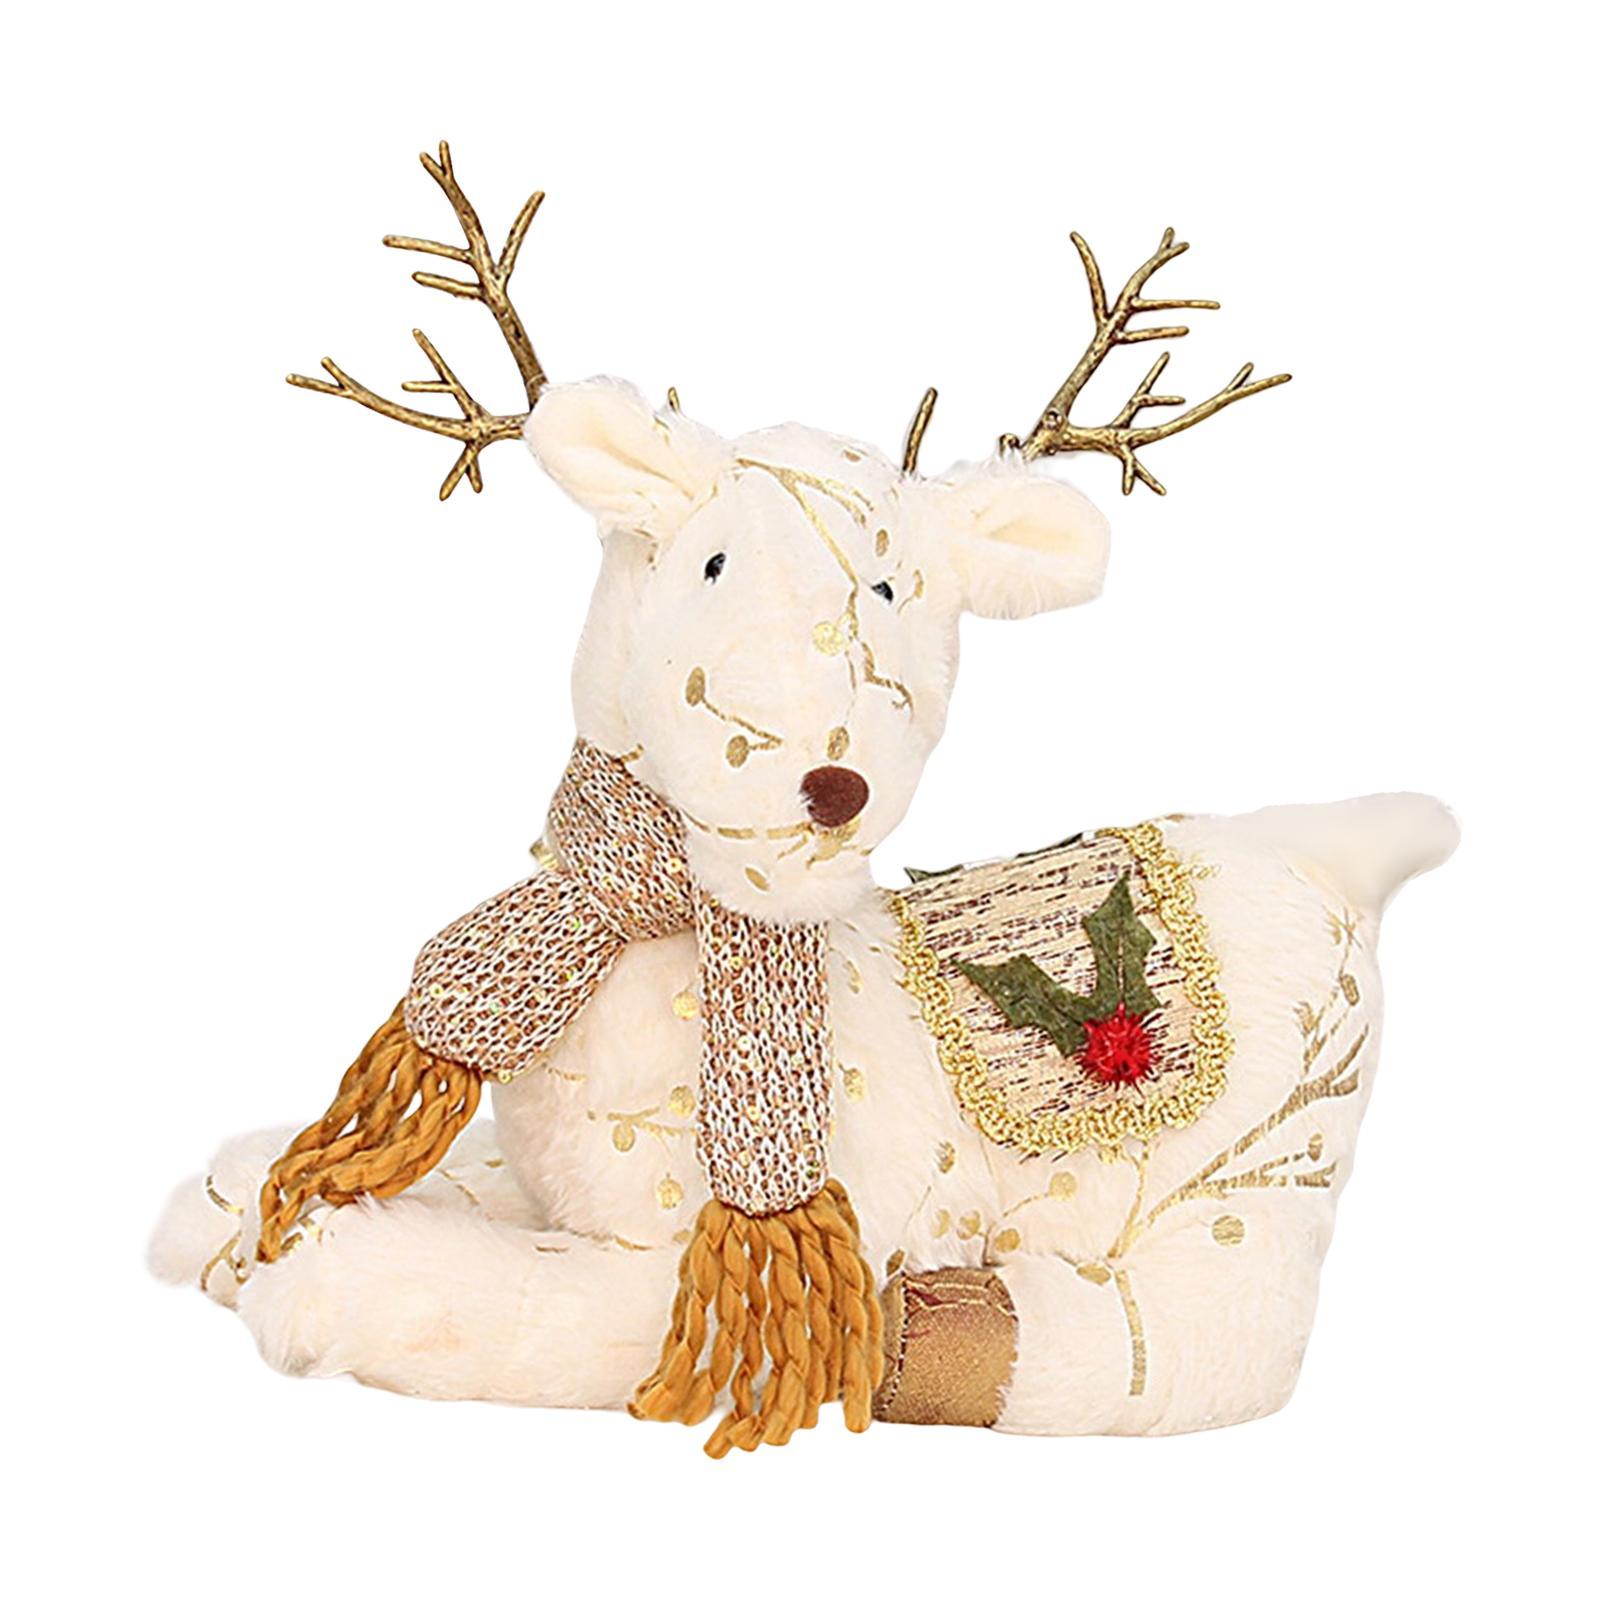 Elk Ornament Hotel Shopping Mall Window Party Decor Collectibles